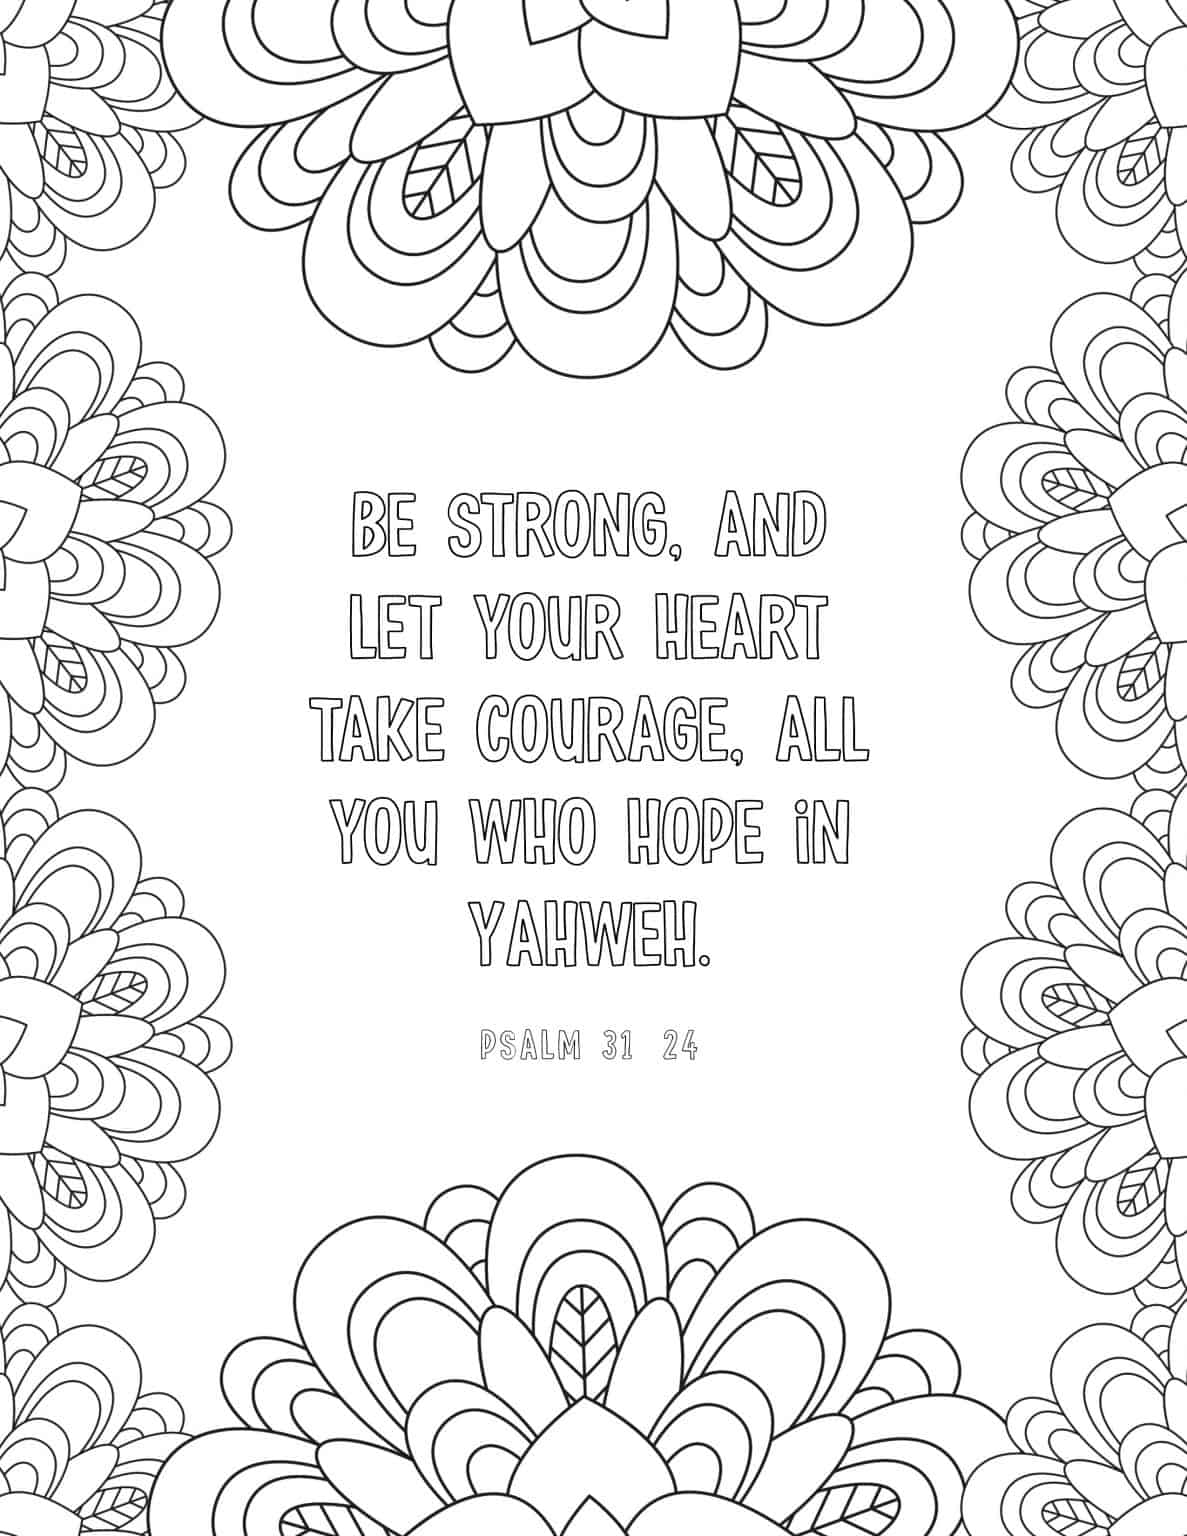 30 Printable Bible Verse Coloring Pages on Hope - My Printable Faith